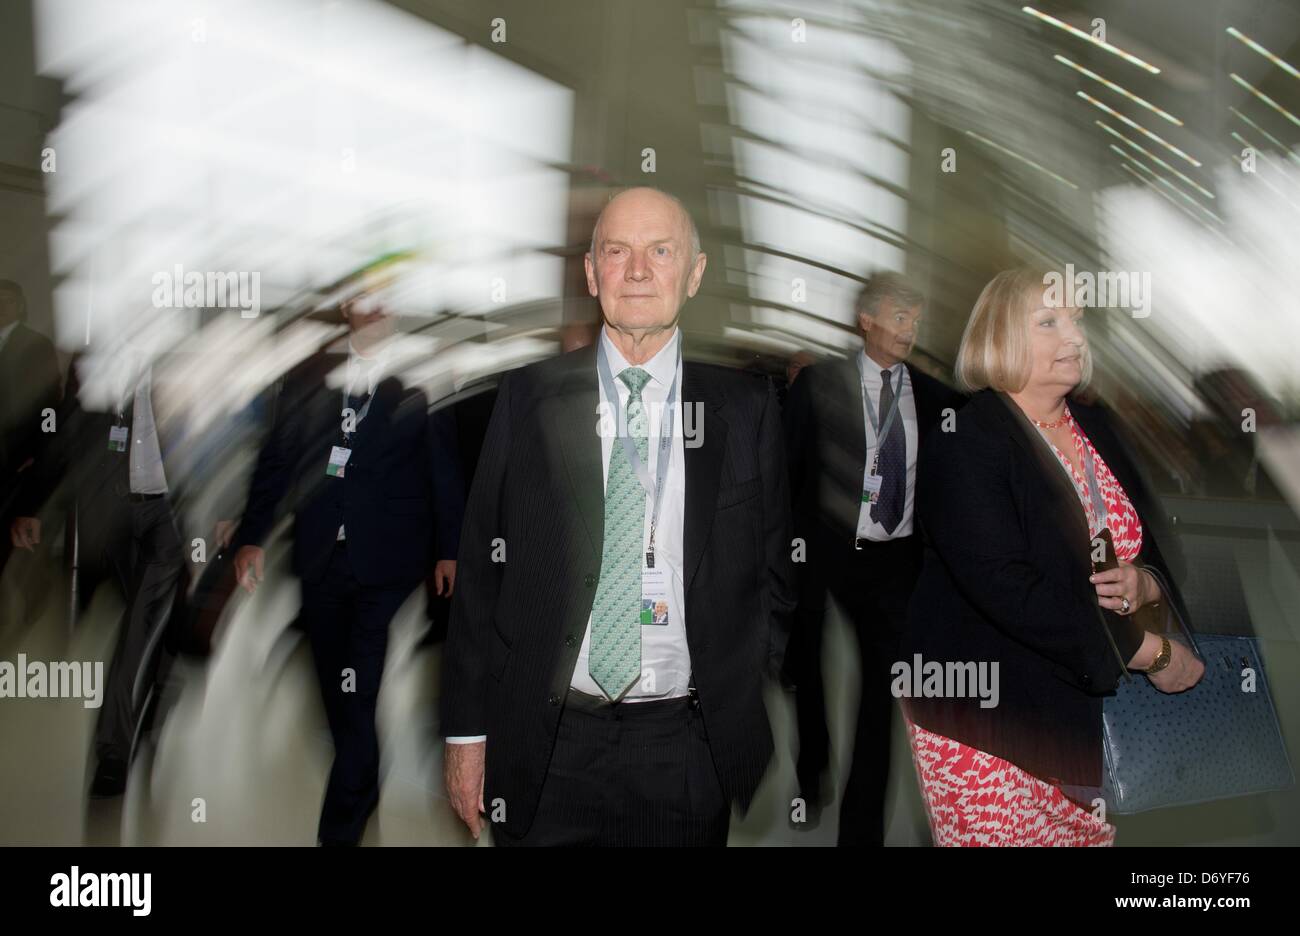 Hanover, Germany. 25th April, 2013. Volkswagen (VW) chairman of the supervisory board, Ferdinand Piech and his wife and supervisory board member Ursula Piech arrive for the VW general meeting in Hanover, Germany, 25 April 2013. Photo: JULIAN STRATENSCHULTE/dpa/Alamy Live News Stock Photo